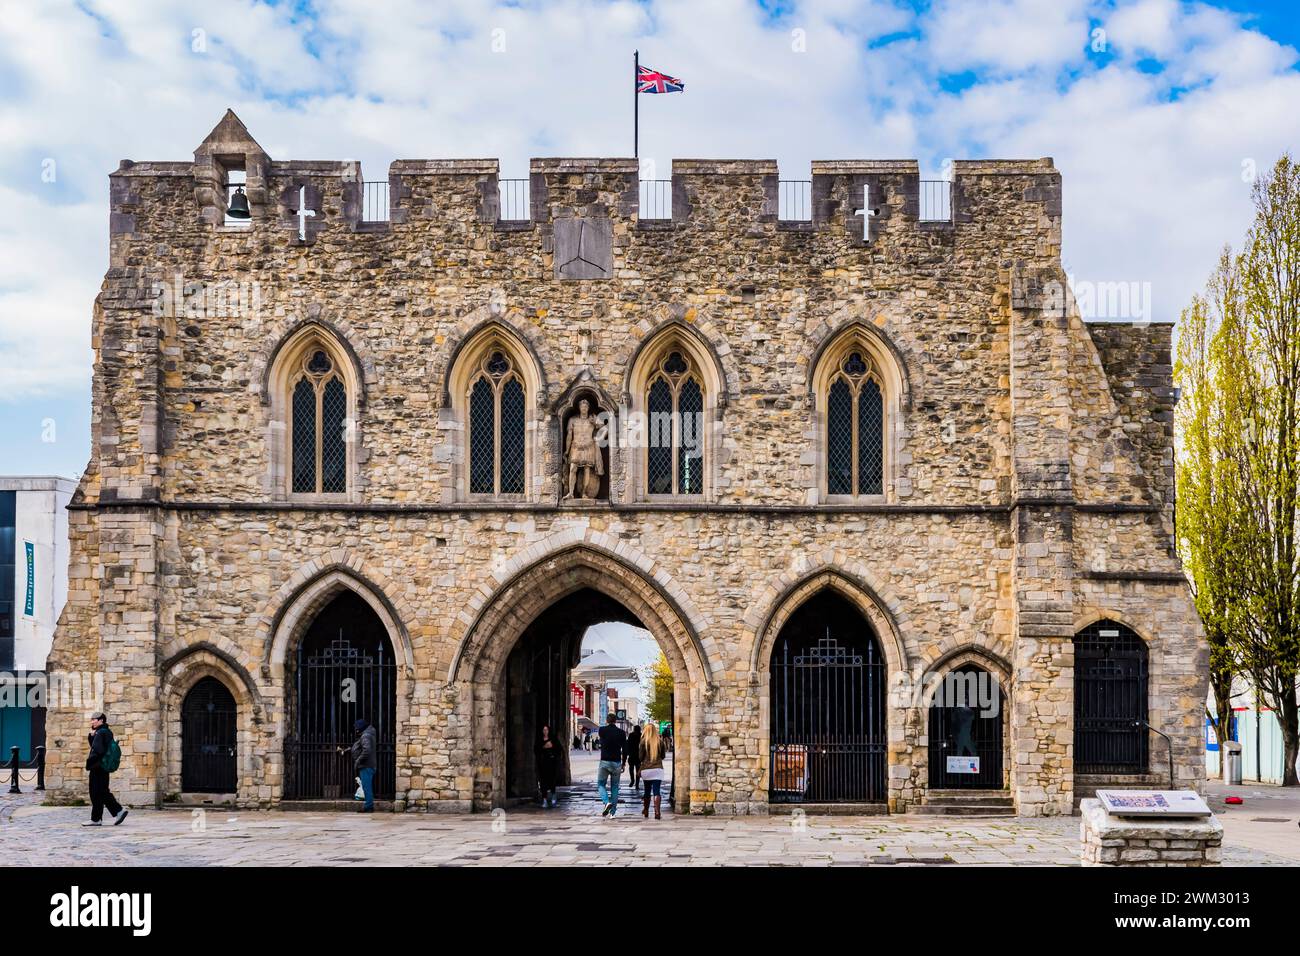 The Bargate is medieval gatehouse in the city centre of Southampton. The Bargate from the south. Southampton, Hampshire, England, United Kingdom, UK, Stock Photo